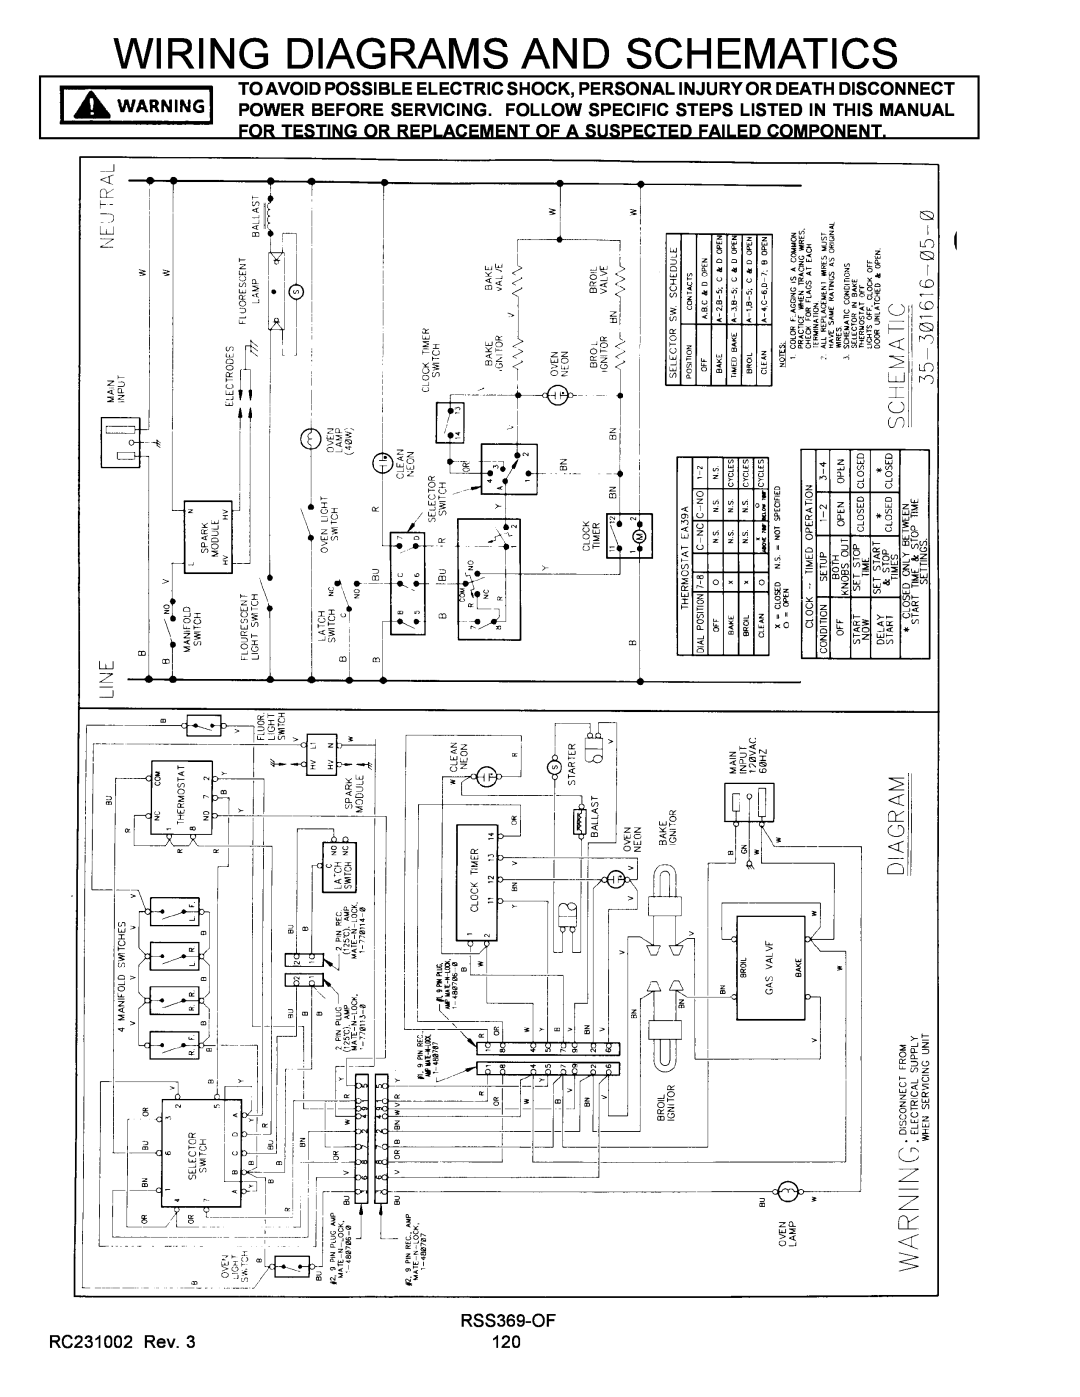 Amana RST service manual Wiring Diagrams And Schematics, RSS369-OF, RC231002 Rev 